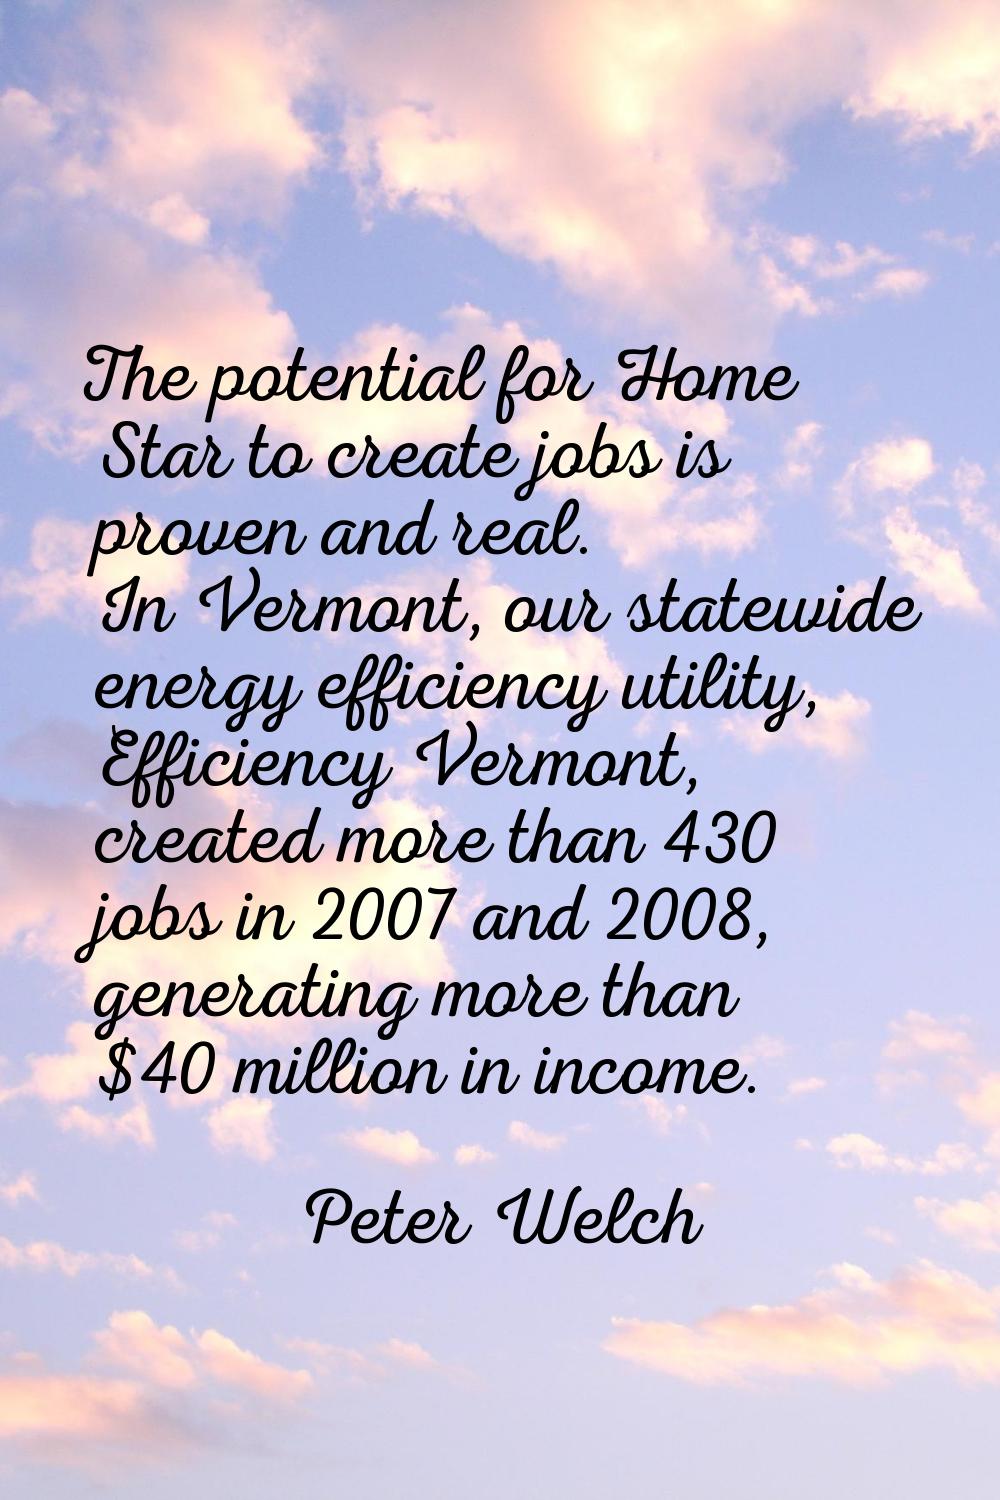 The potential for Home Star to create jobs is proven and real. In Vermont, our statewide energy eff